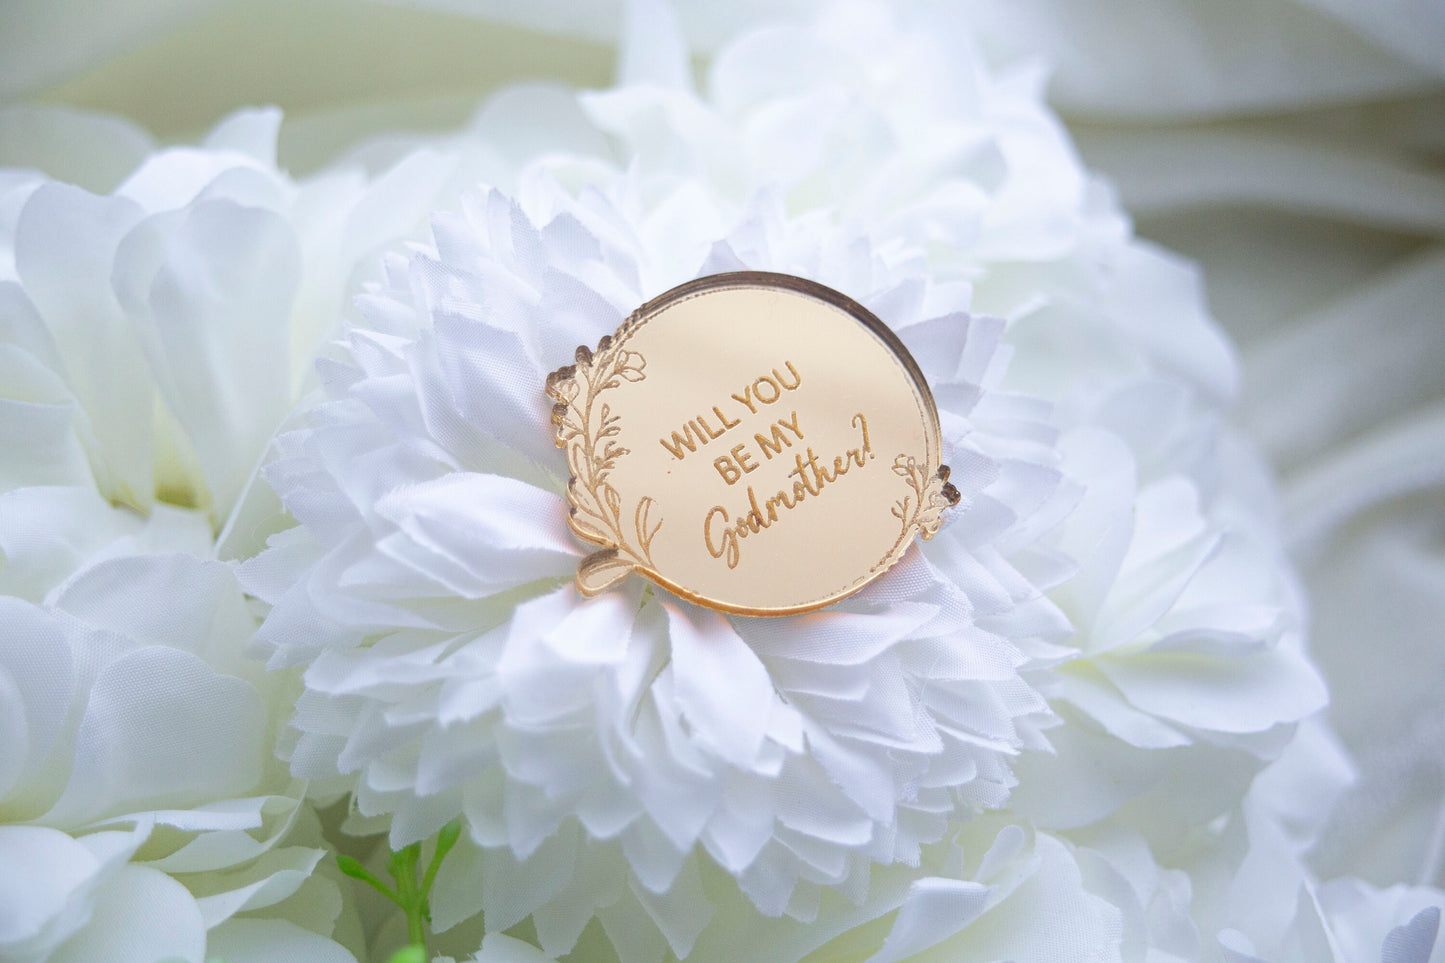 Gold Cupcake Disc | Godmother Proposal | Will You Be My Godmother | Godparent Proposal | Cake Topper | Cake Charm | Cake Accessories Kitchen